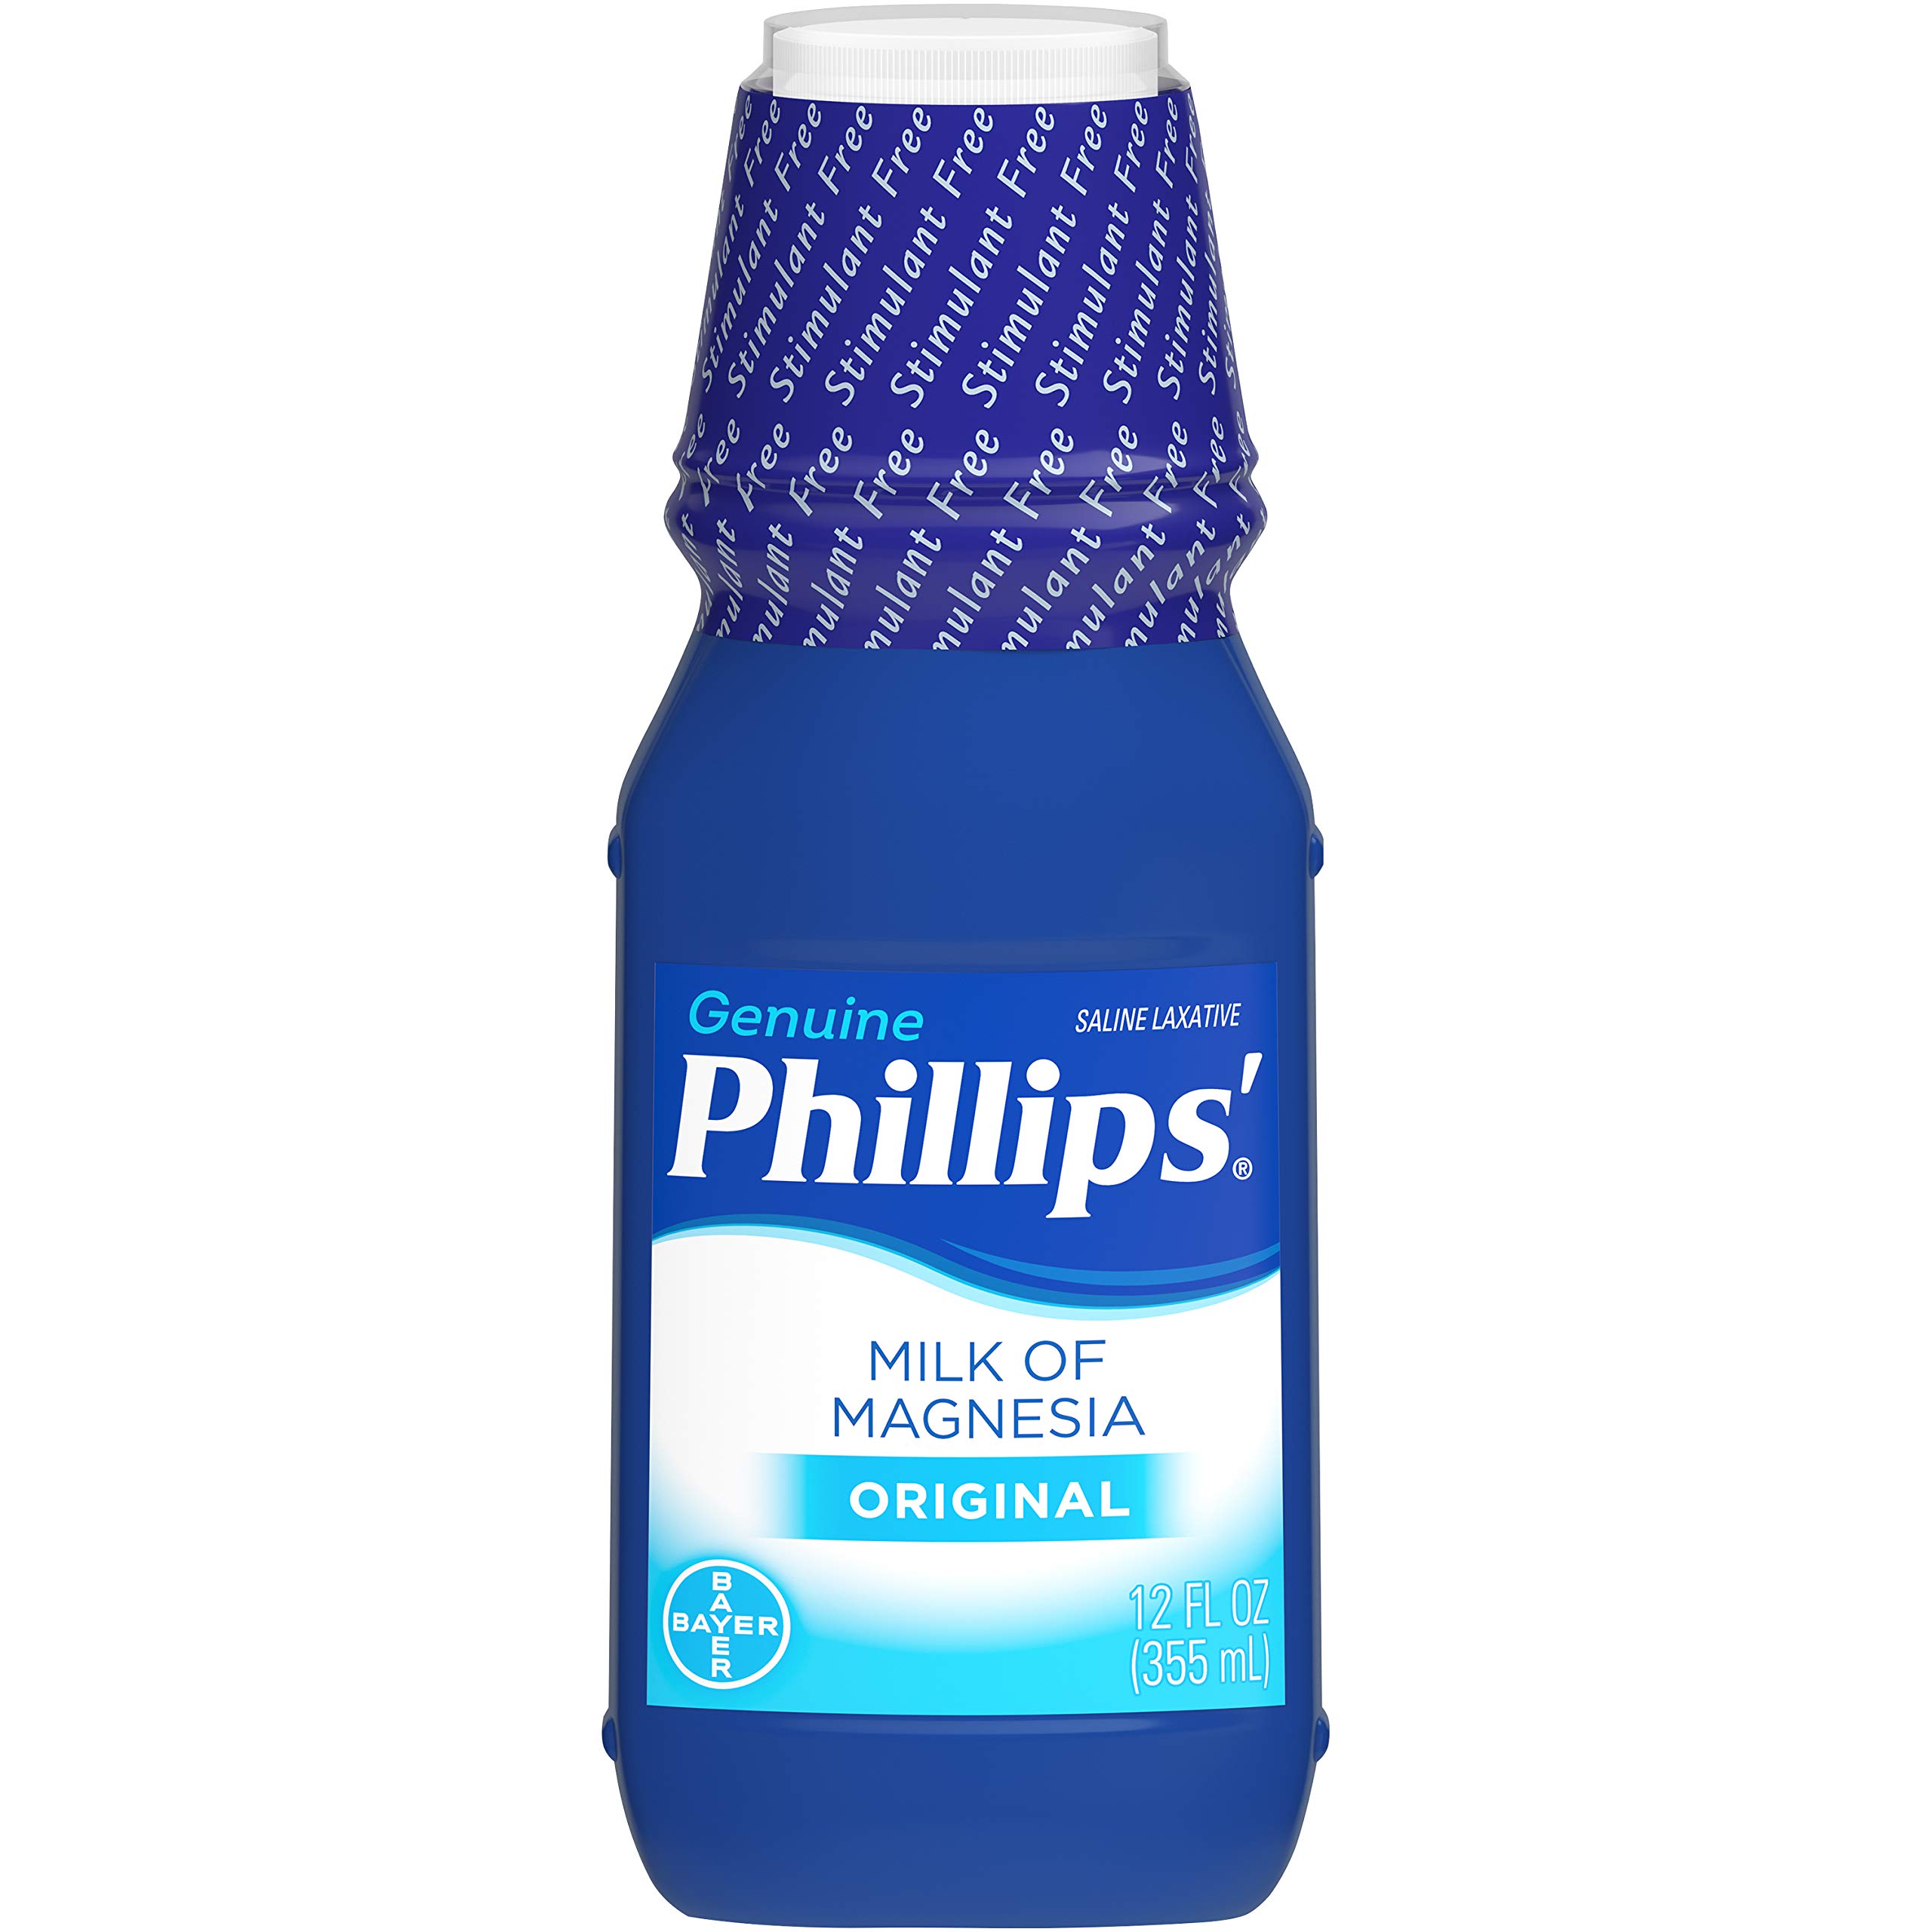 Phillips' Milk of Magnesia Liquid Laxative, 12 oz, Cramp Free & Gentle Overnight Relief Of Occasional Constipation, #1 Milk of Magnesia Brand